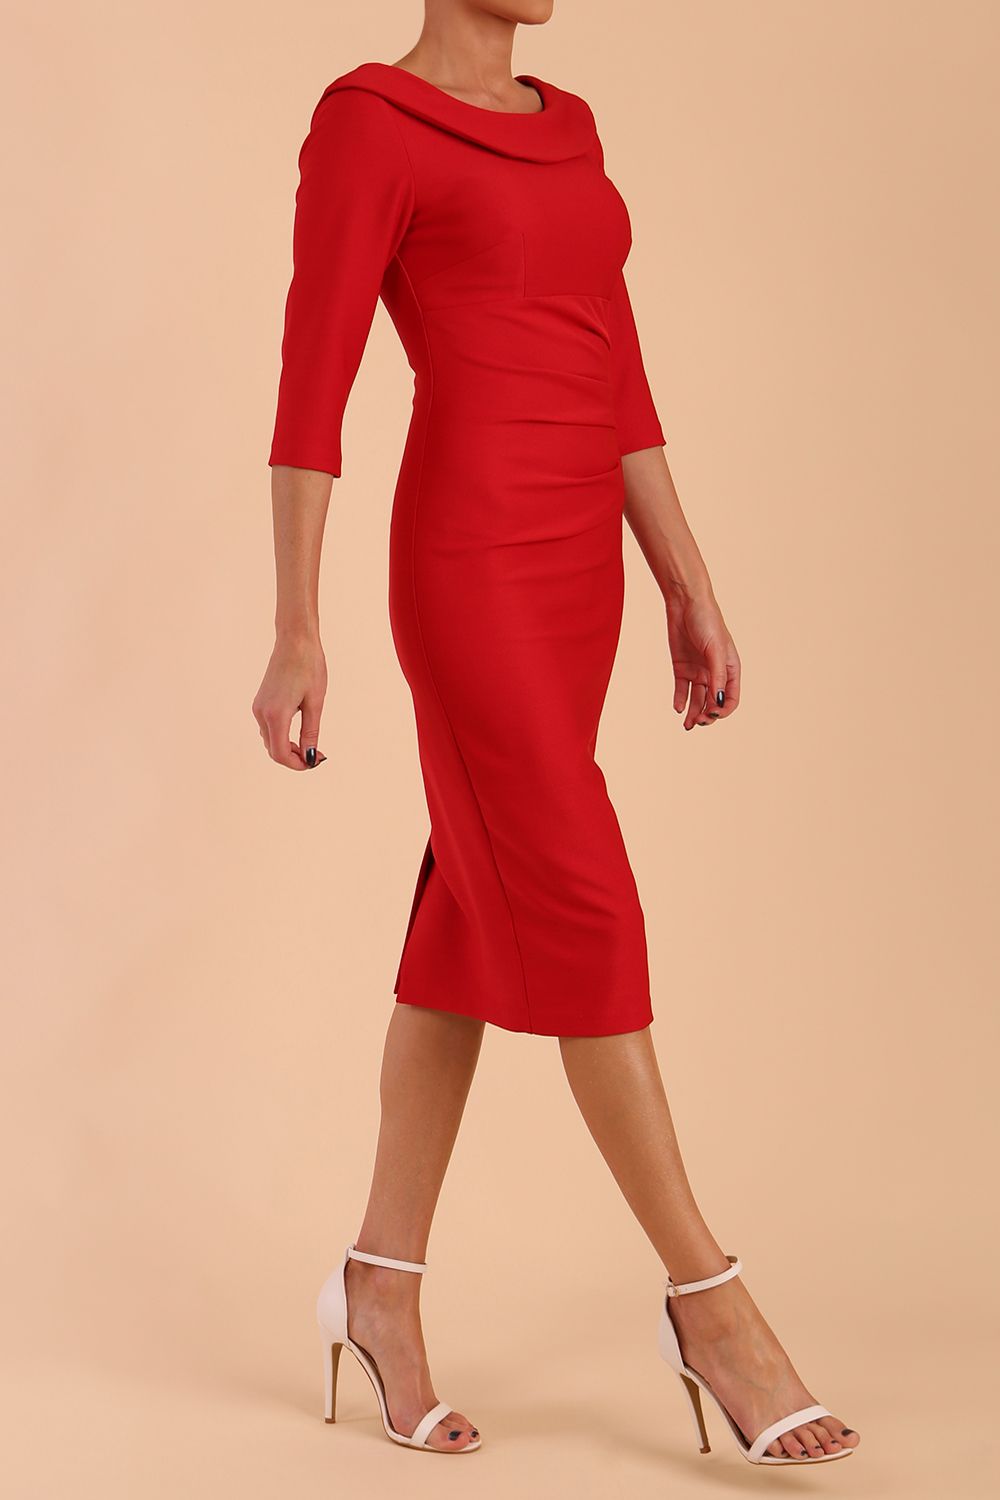 model is wearing diva catwalk seed axford pencil sleeved dress with rounded folded collar in Salsa Red side